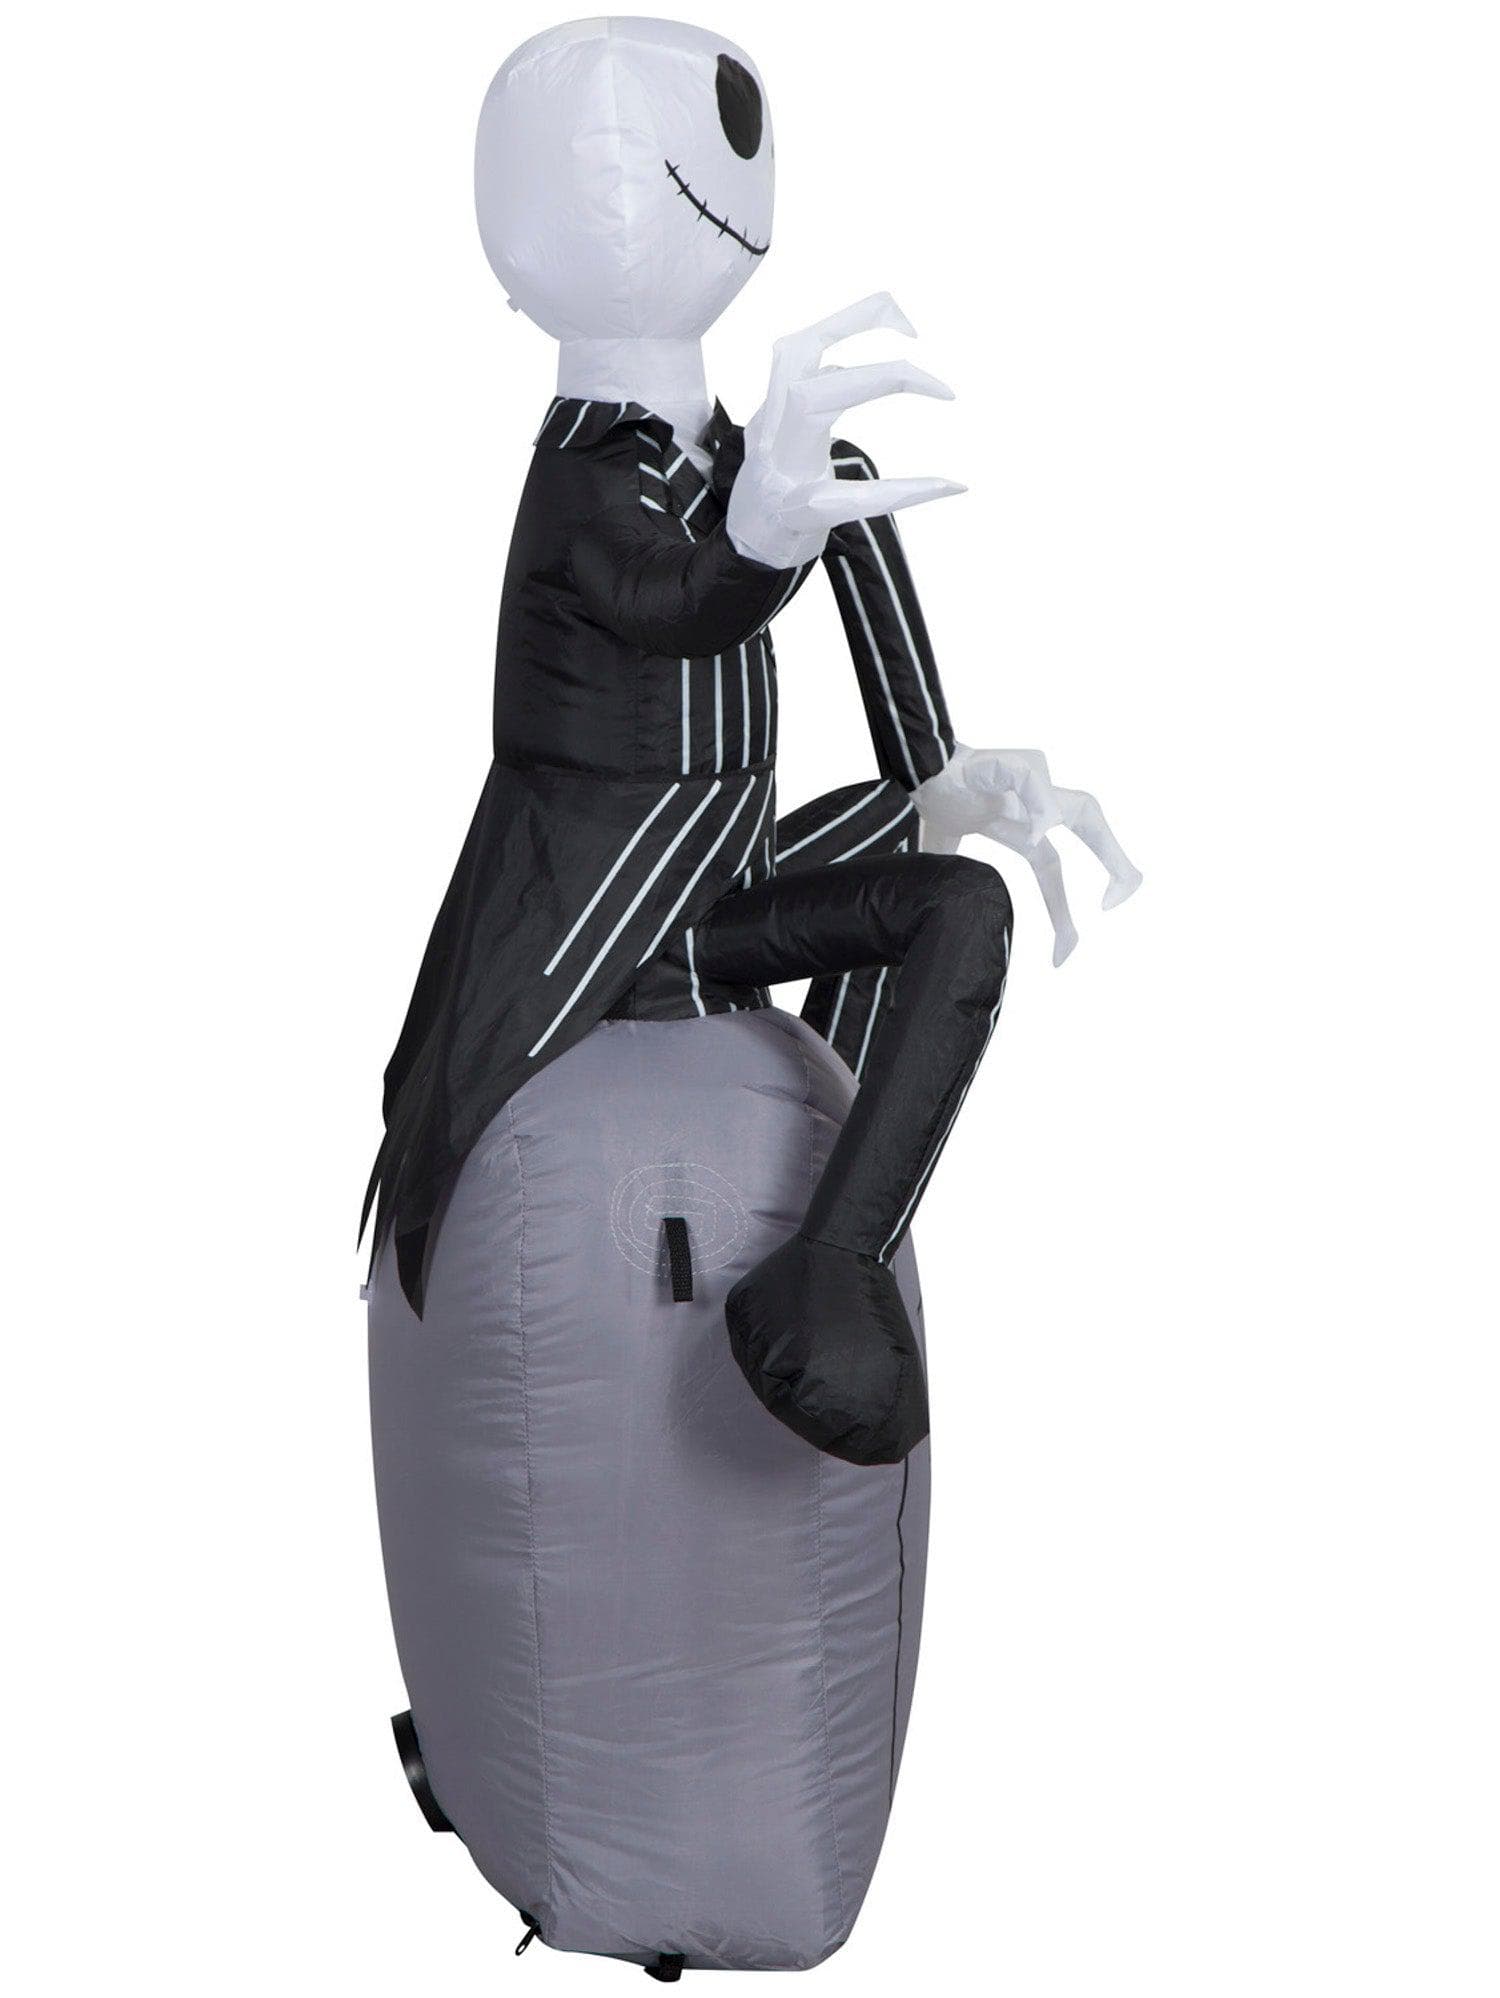 3.5 Foot The Nightmare Before Christmas Jack Skellington Light Up Halloween Inflatable Lawn Decor - costumes.com